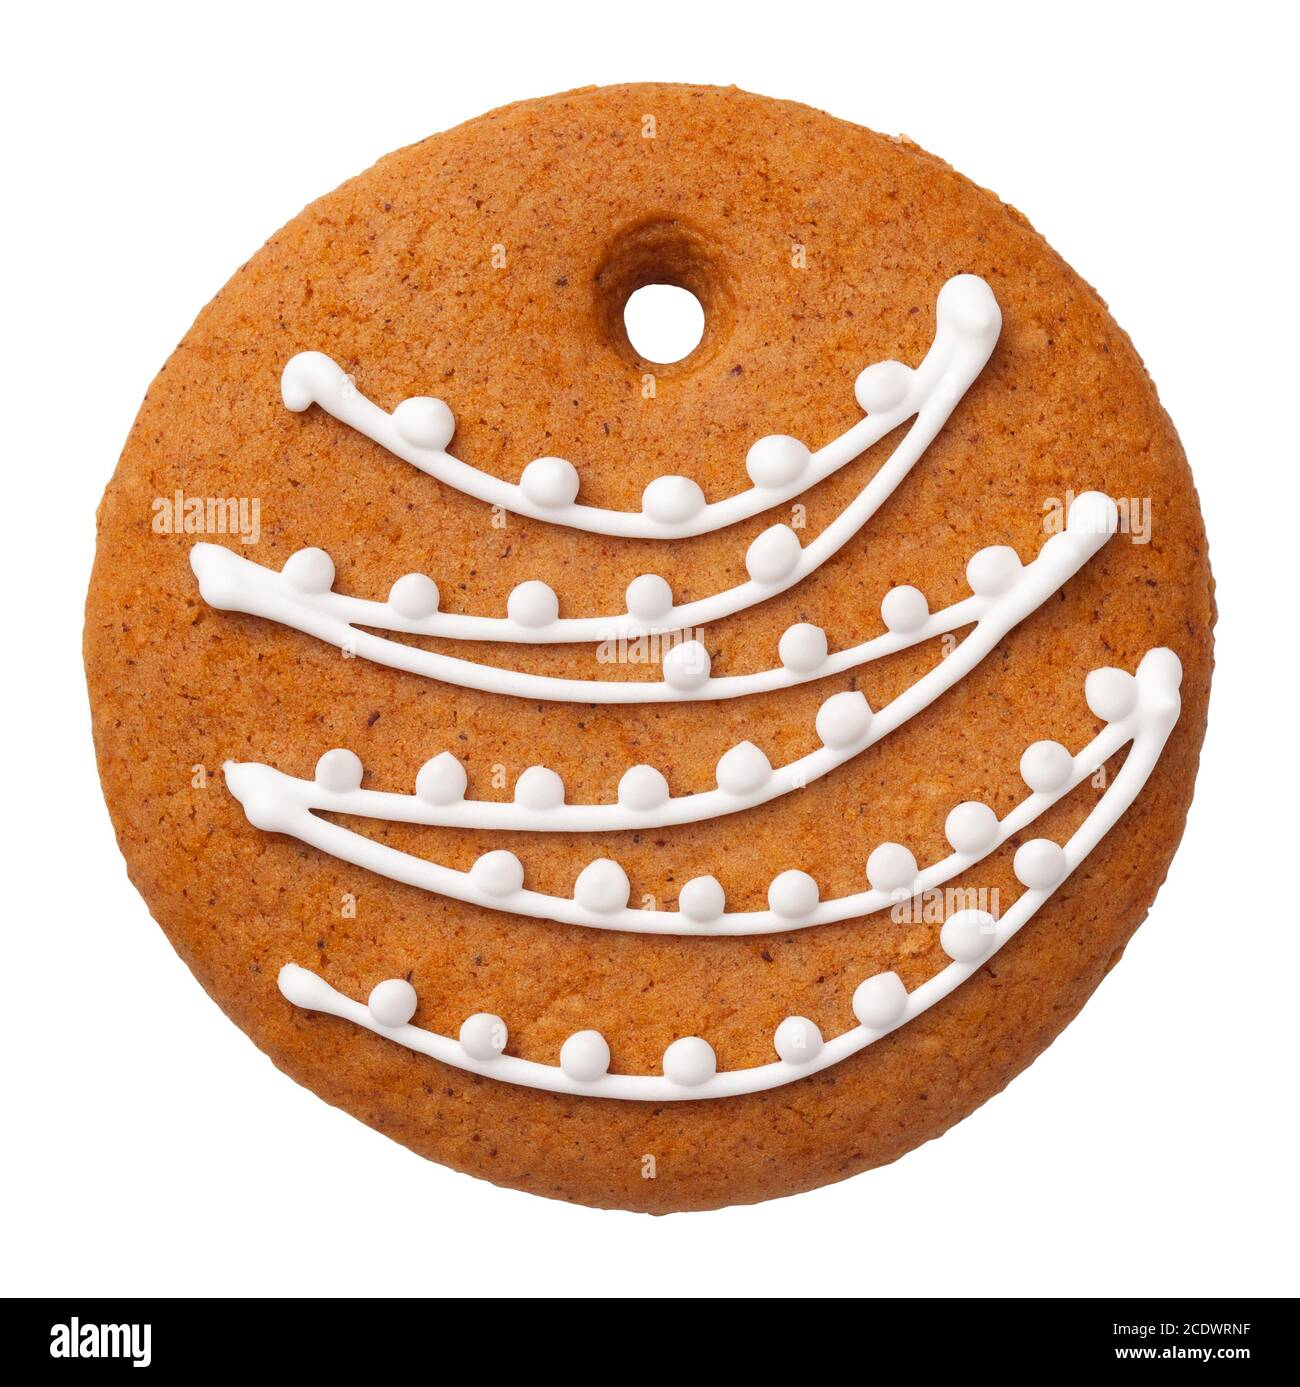 Gingerbread Bauble Cookie Isolated on White Background Stock Photo